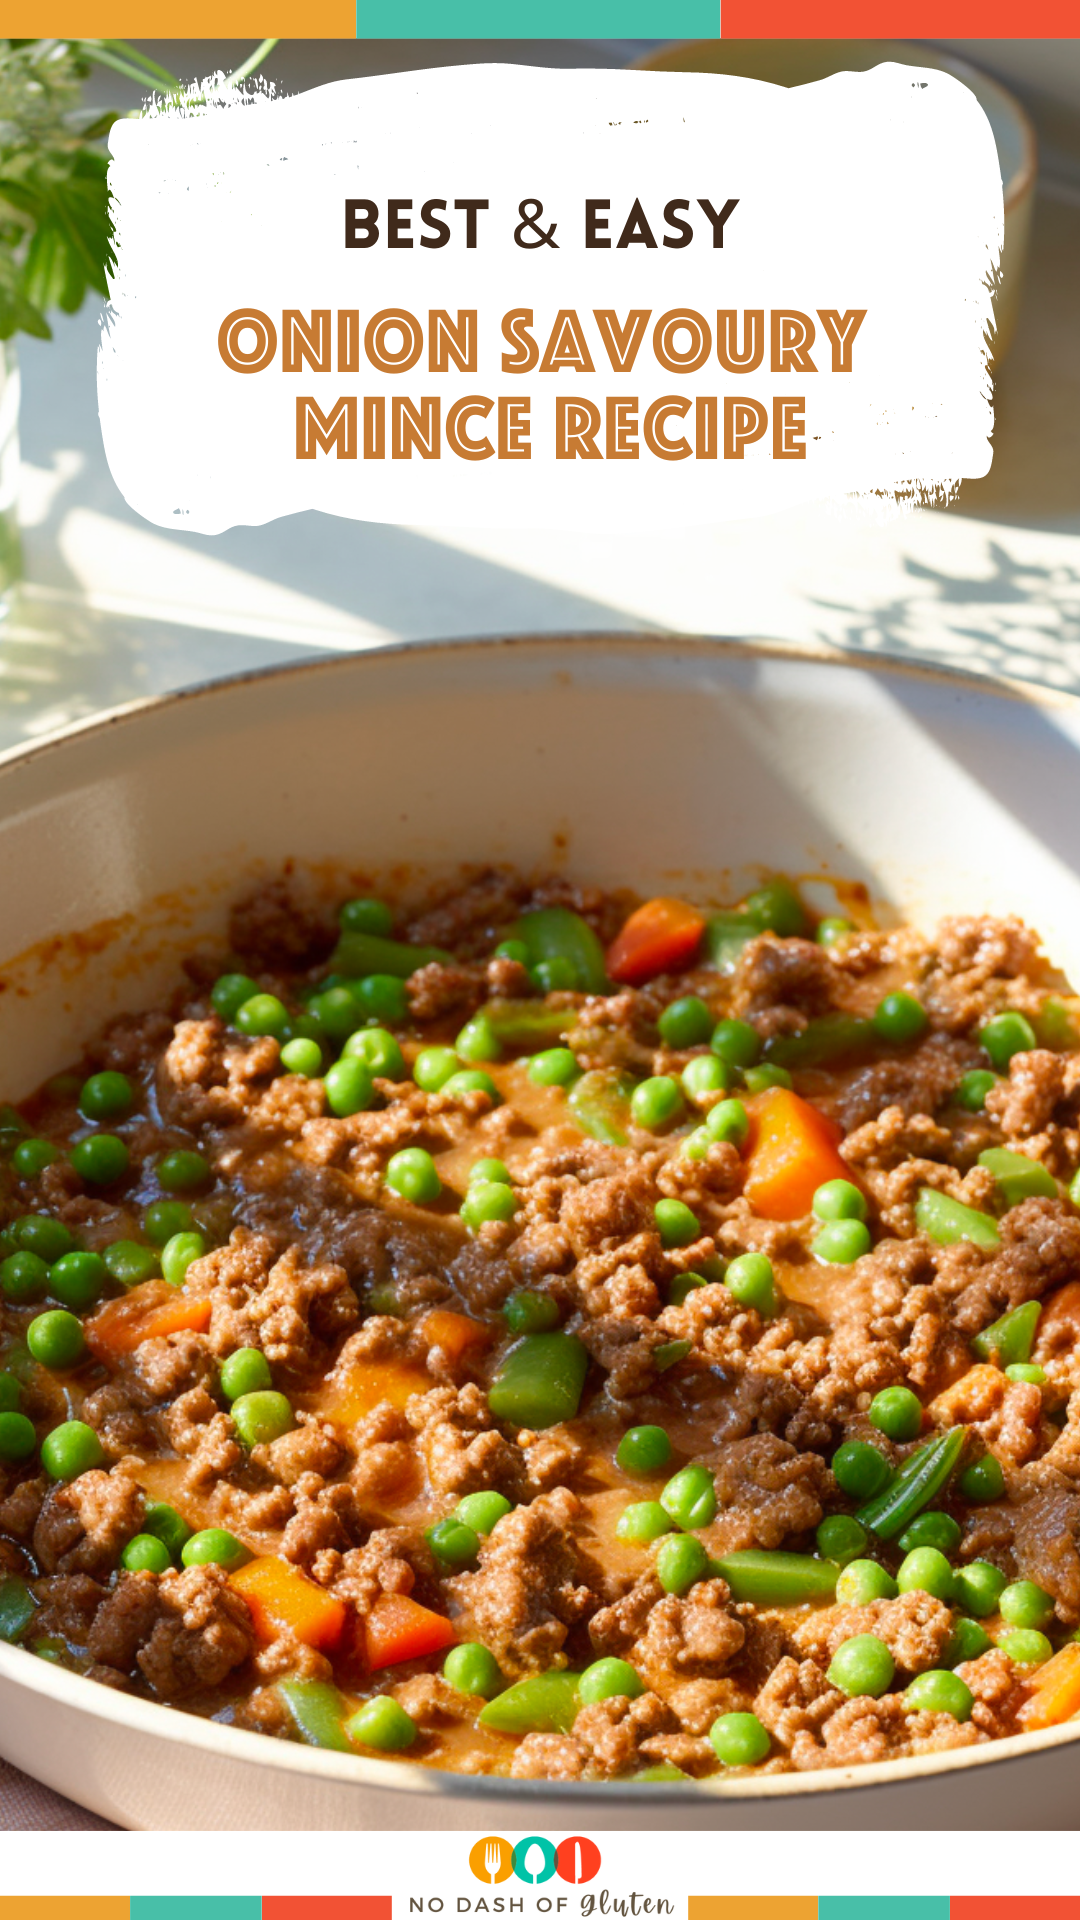 Easy Onion Savoury Mince Recipe - Pin This Recipe To Save It For Later!